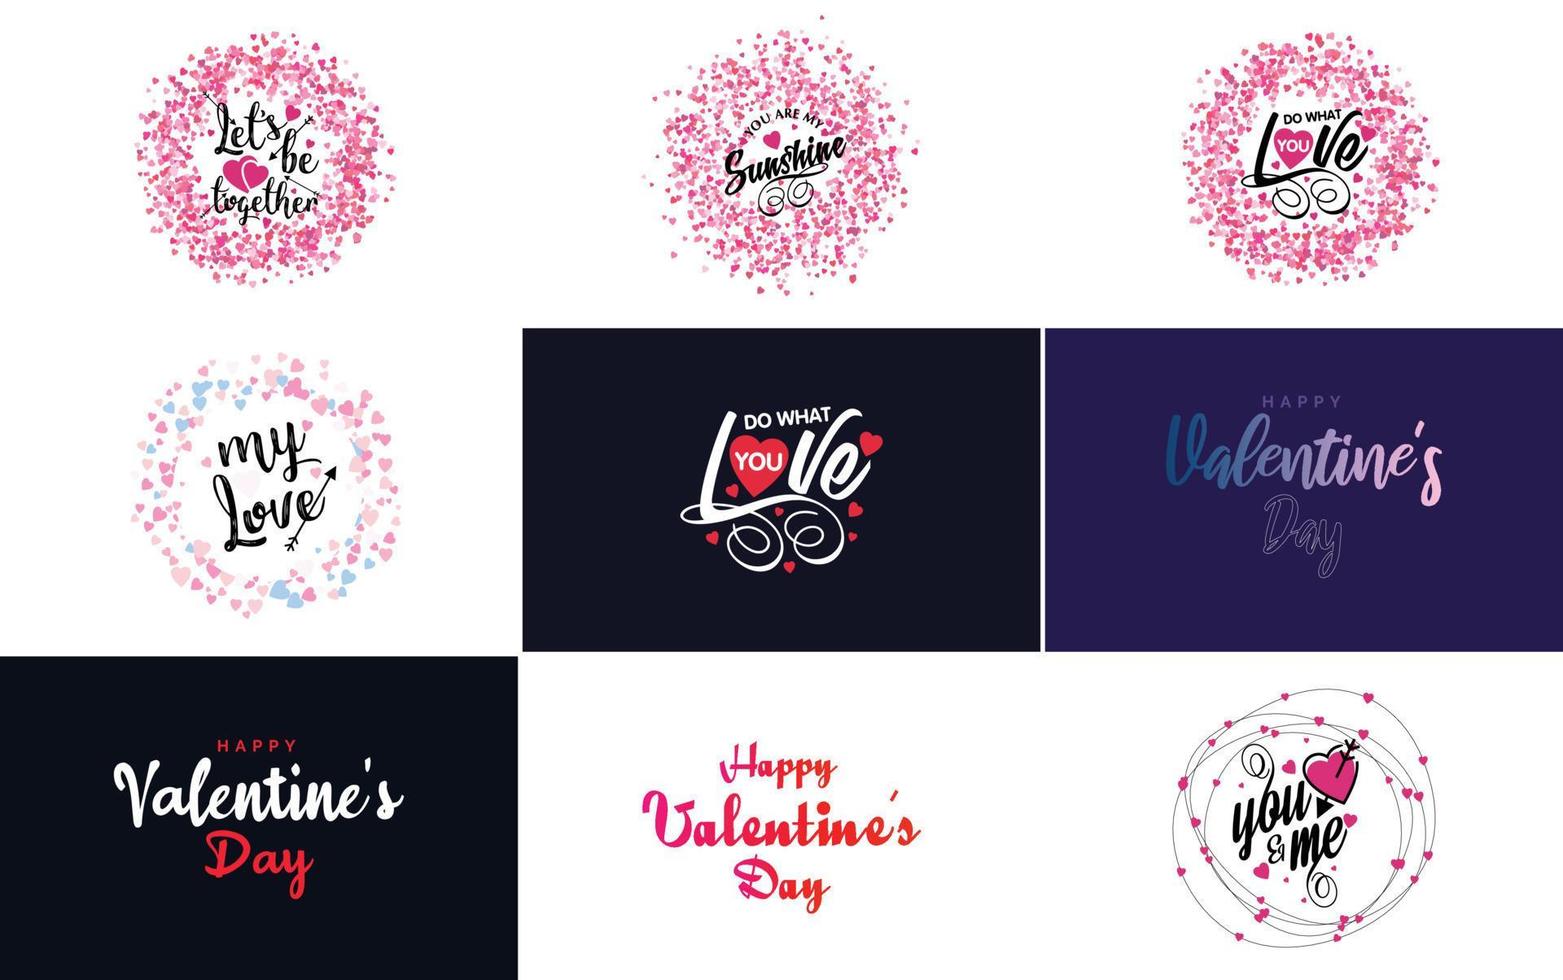 Happy Valentine's Day and Love calligraphy greeting card templates with a heart theme vector